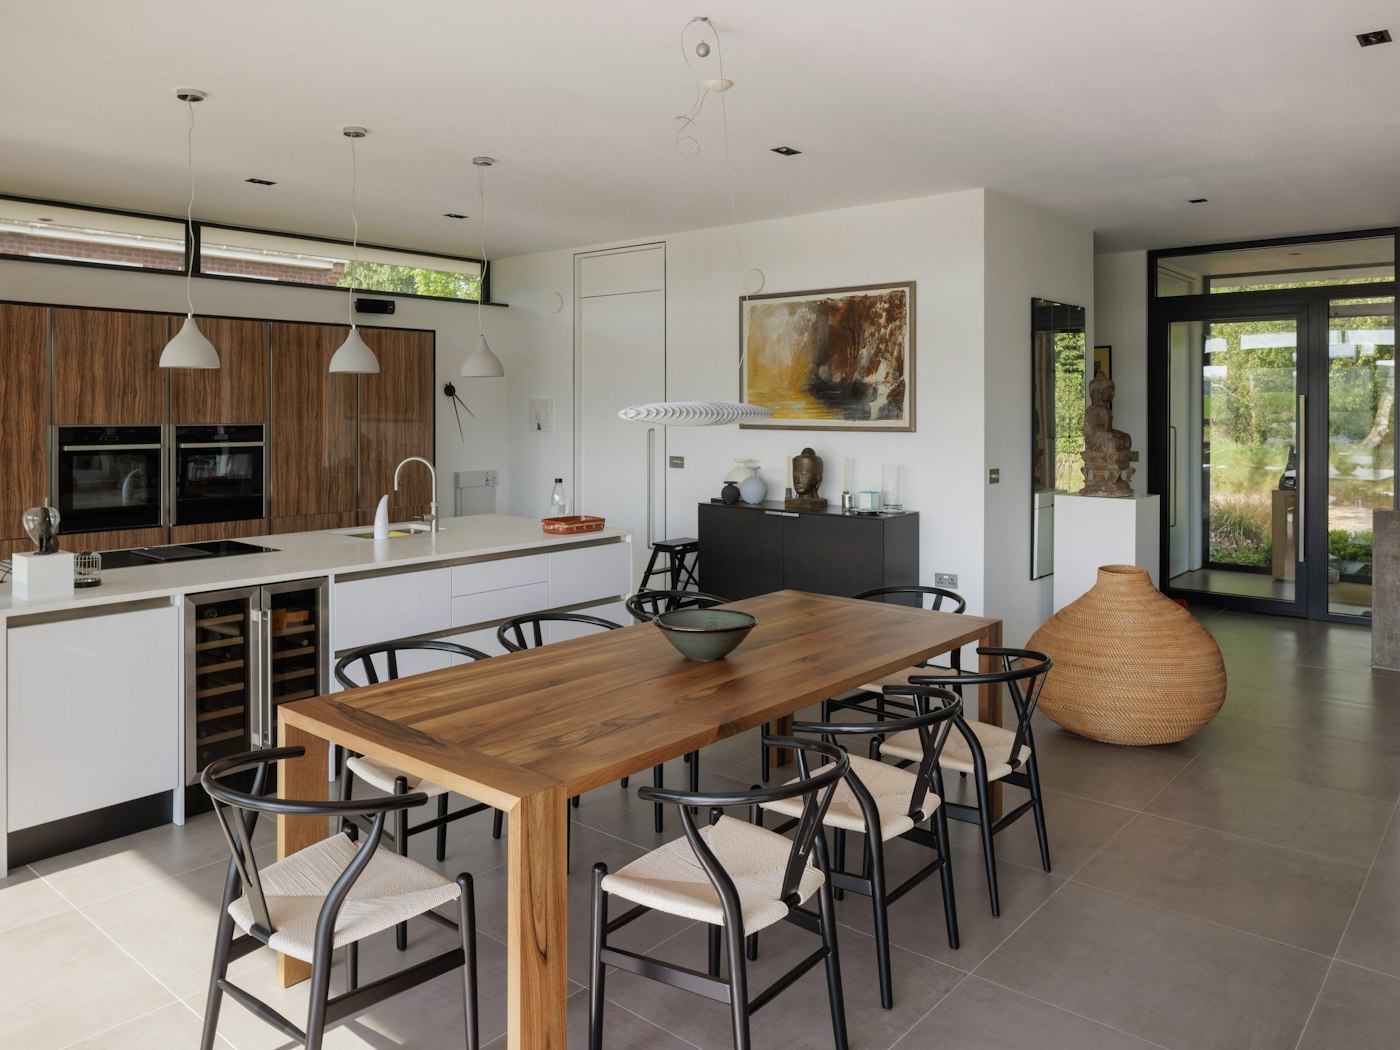 The modern kitchen/dining area is a bright and airy space